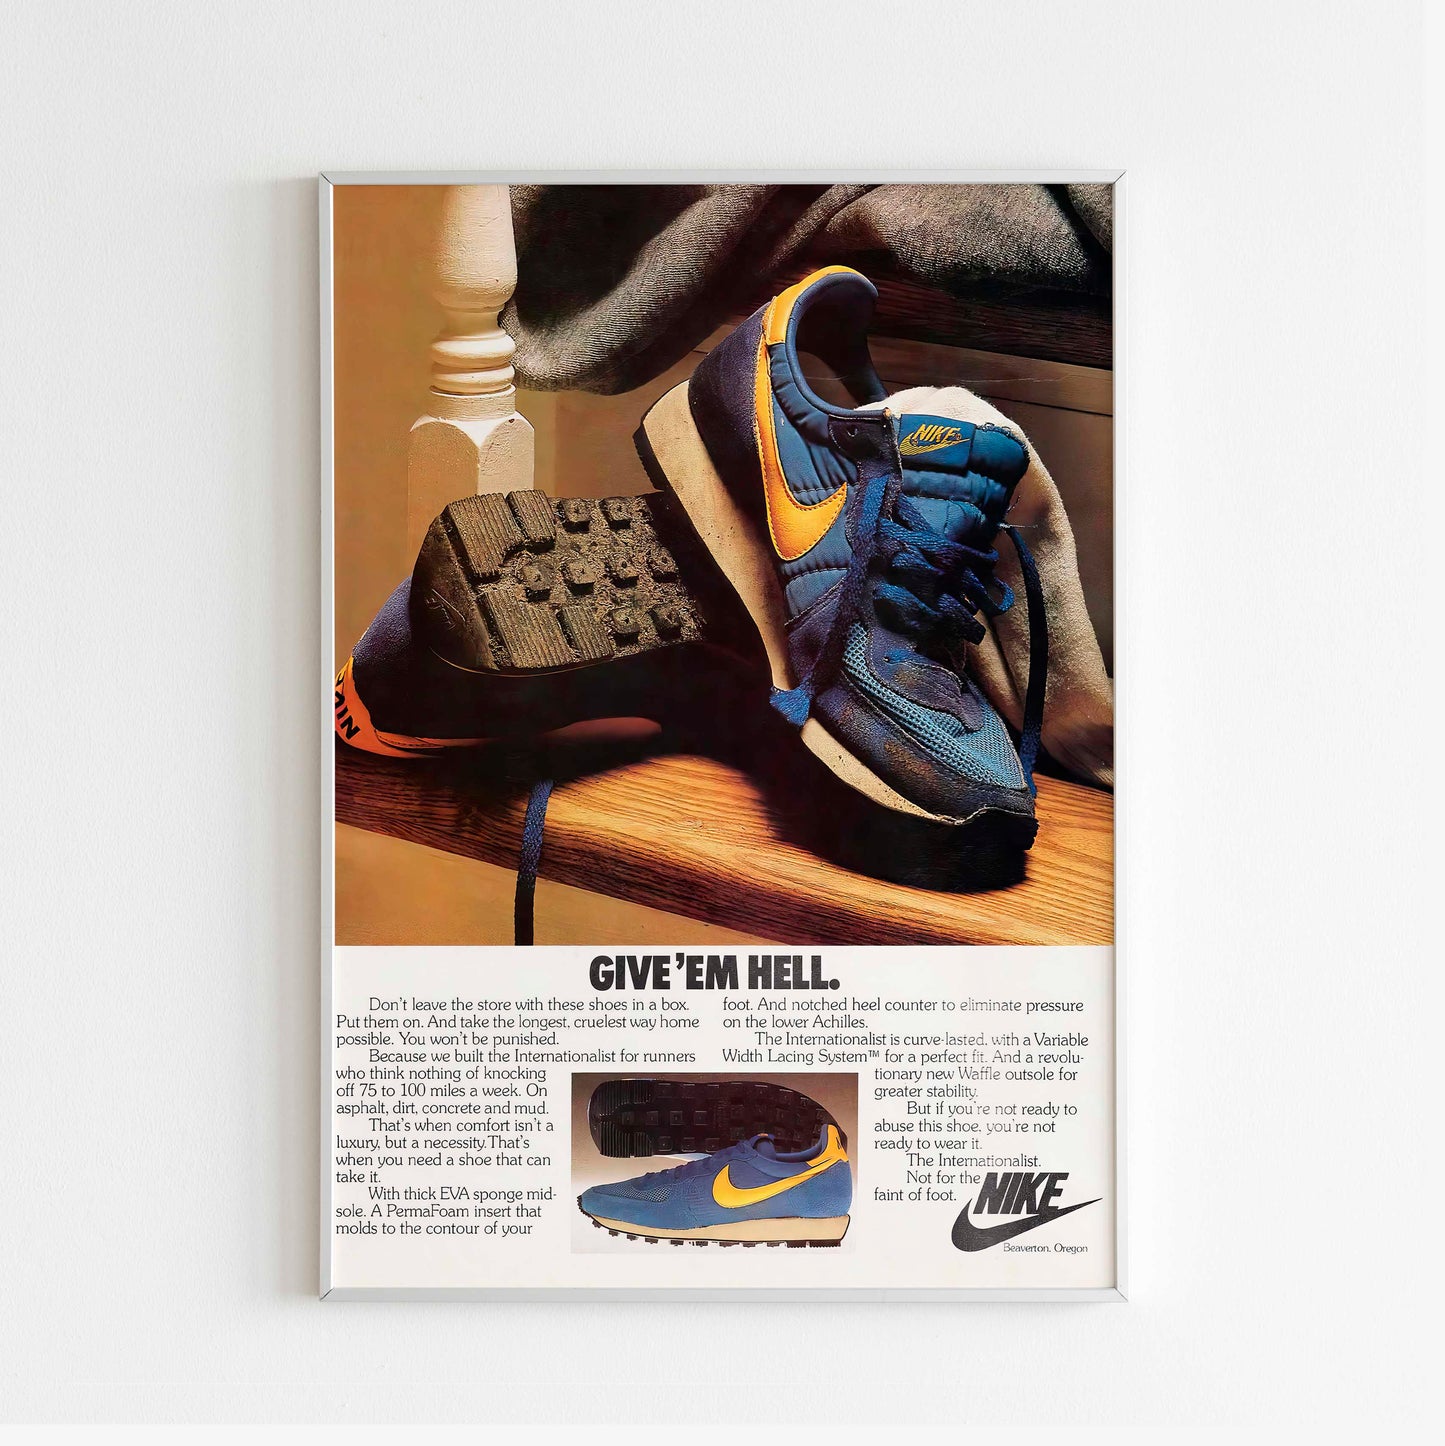 Nike "Give Em Hell" Poster Advertising, 90s Style Shoes Print, Magazine Retro Advertisement